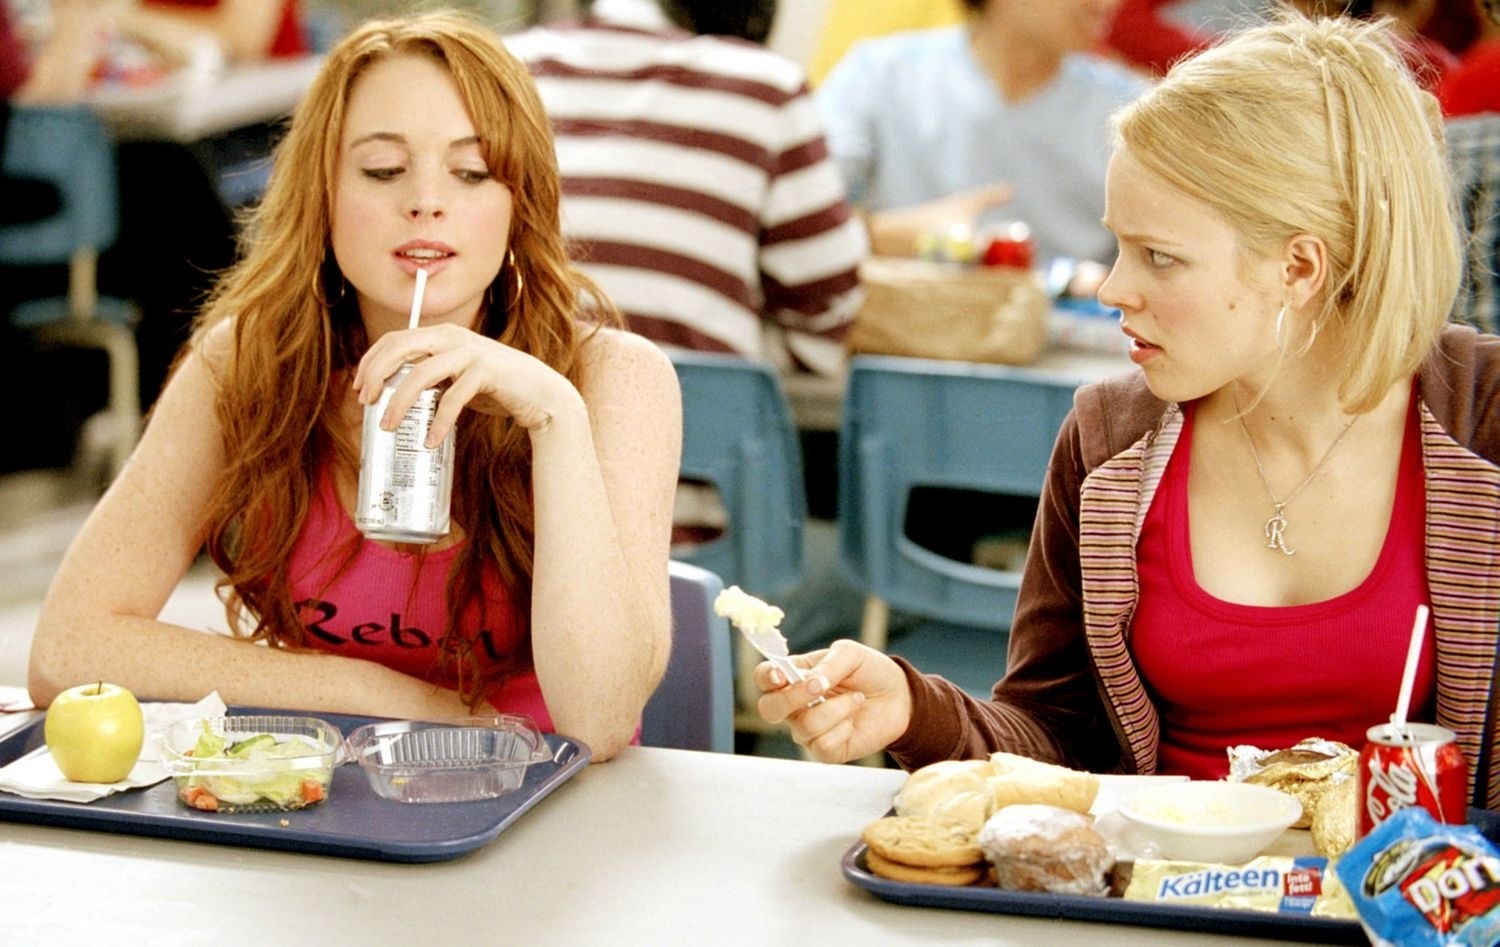 Can You Score Better Than 80% On This 24-Question English Quiz on Your First Try? Mean Girls Toxic Friendship